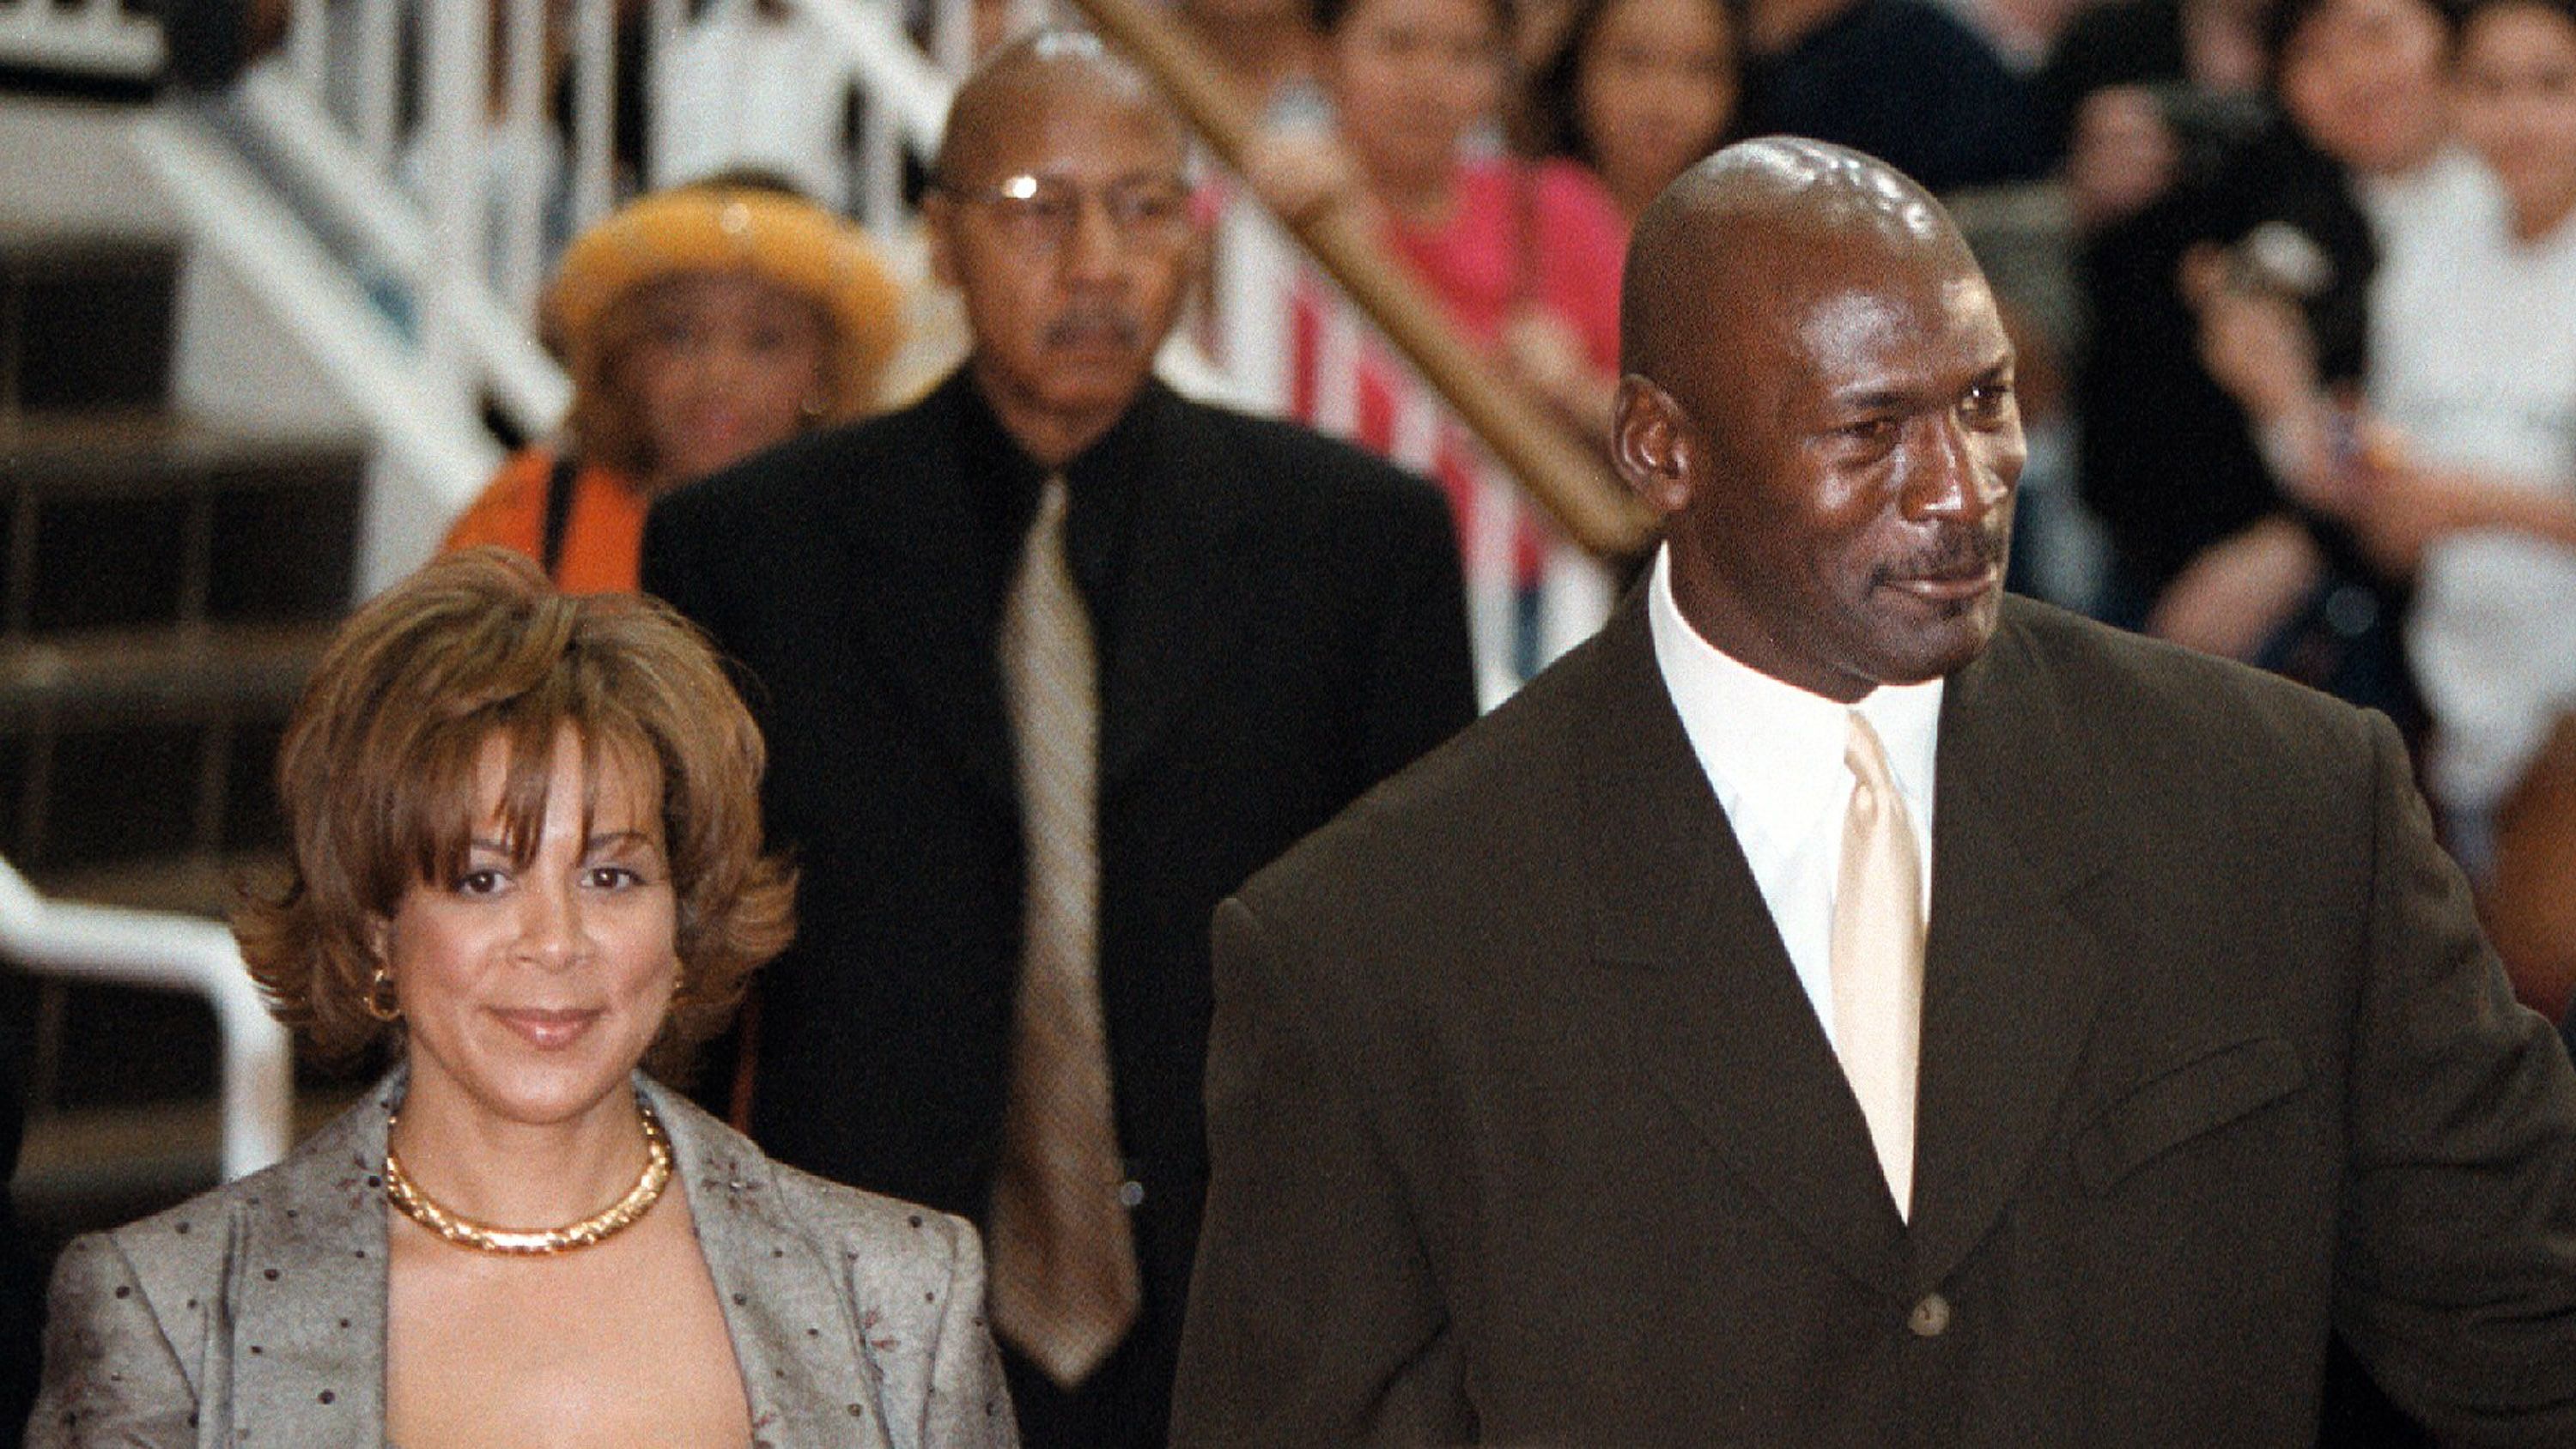  Michael Jordan and wife Juanita at the world premier of "Michael Jordan To The Max" in 2000 in Chicago | Source: Getty Images